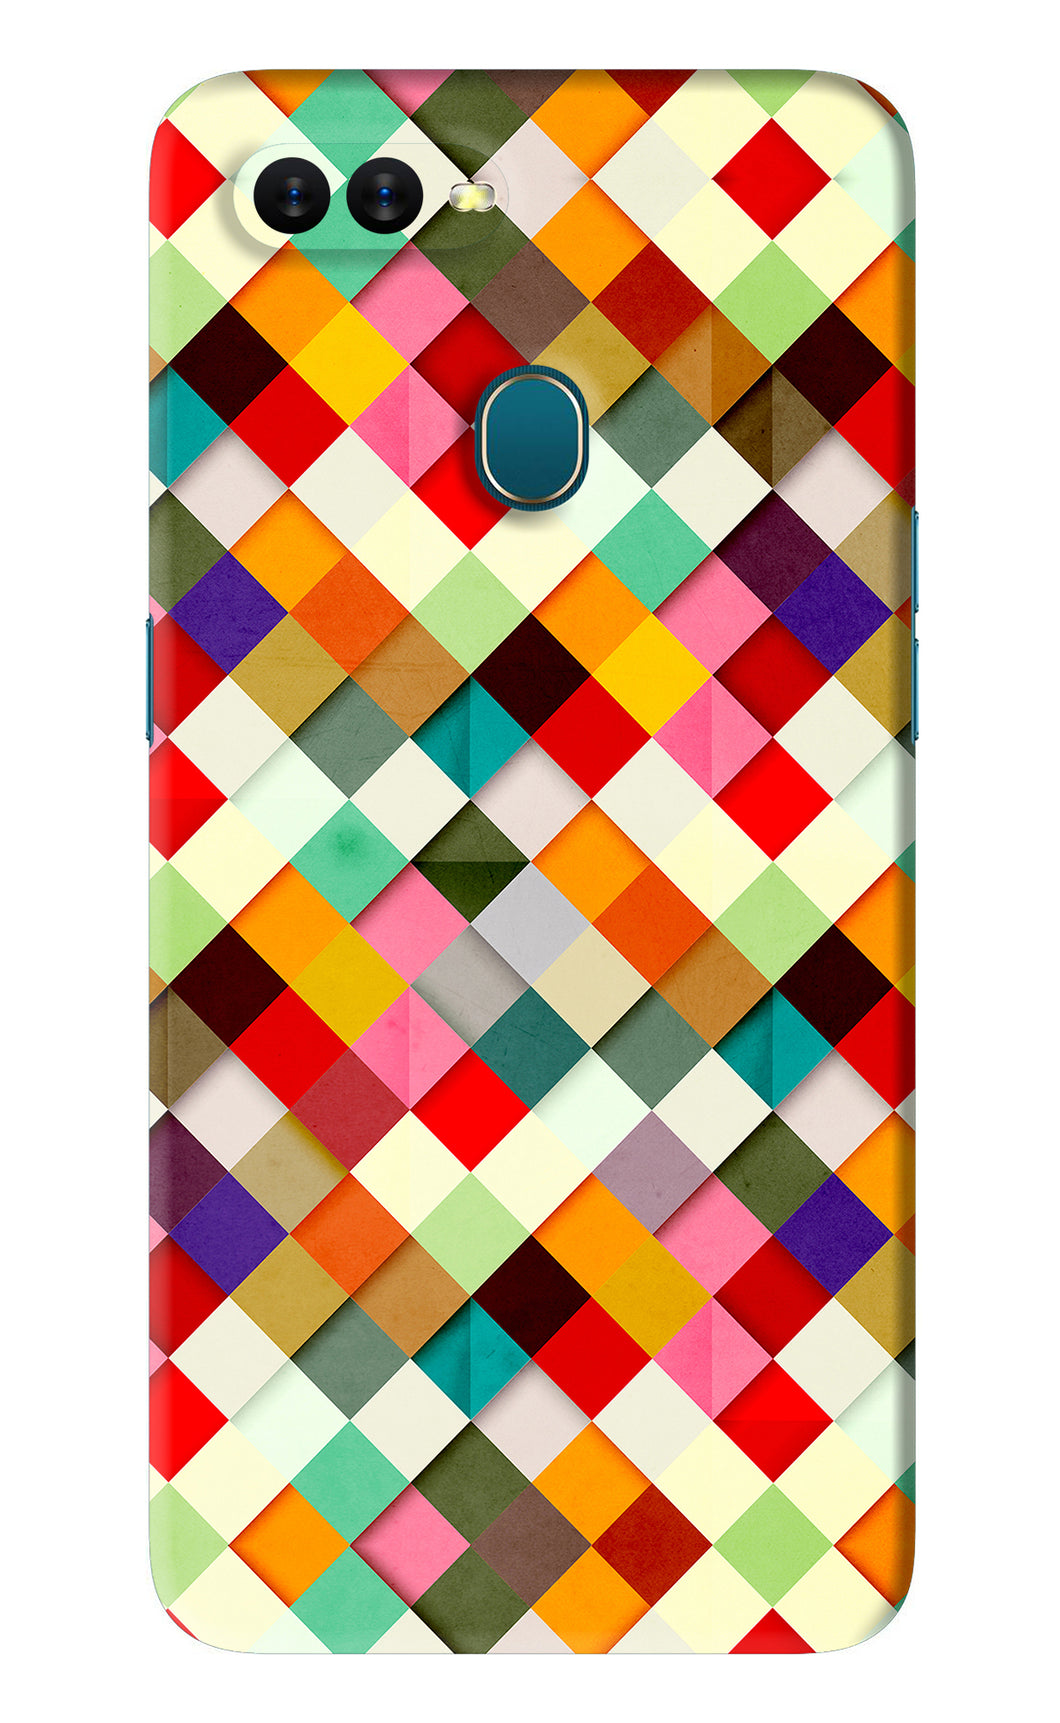 Geometric Abstract Colorful Oppo A7 Back Skin Wrap